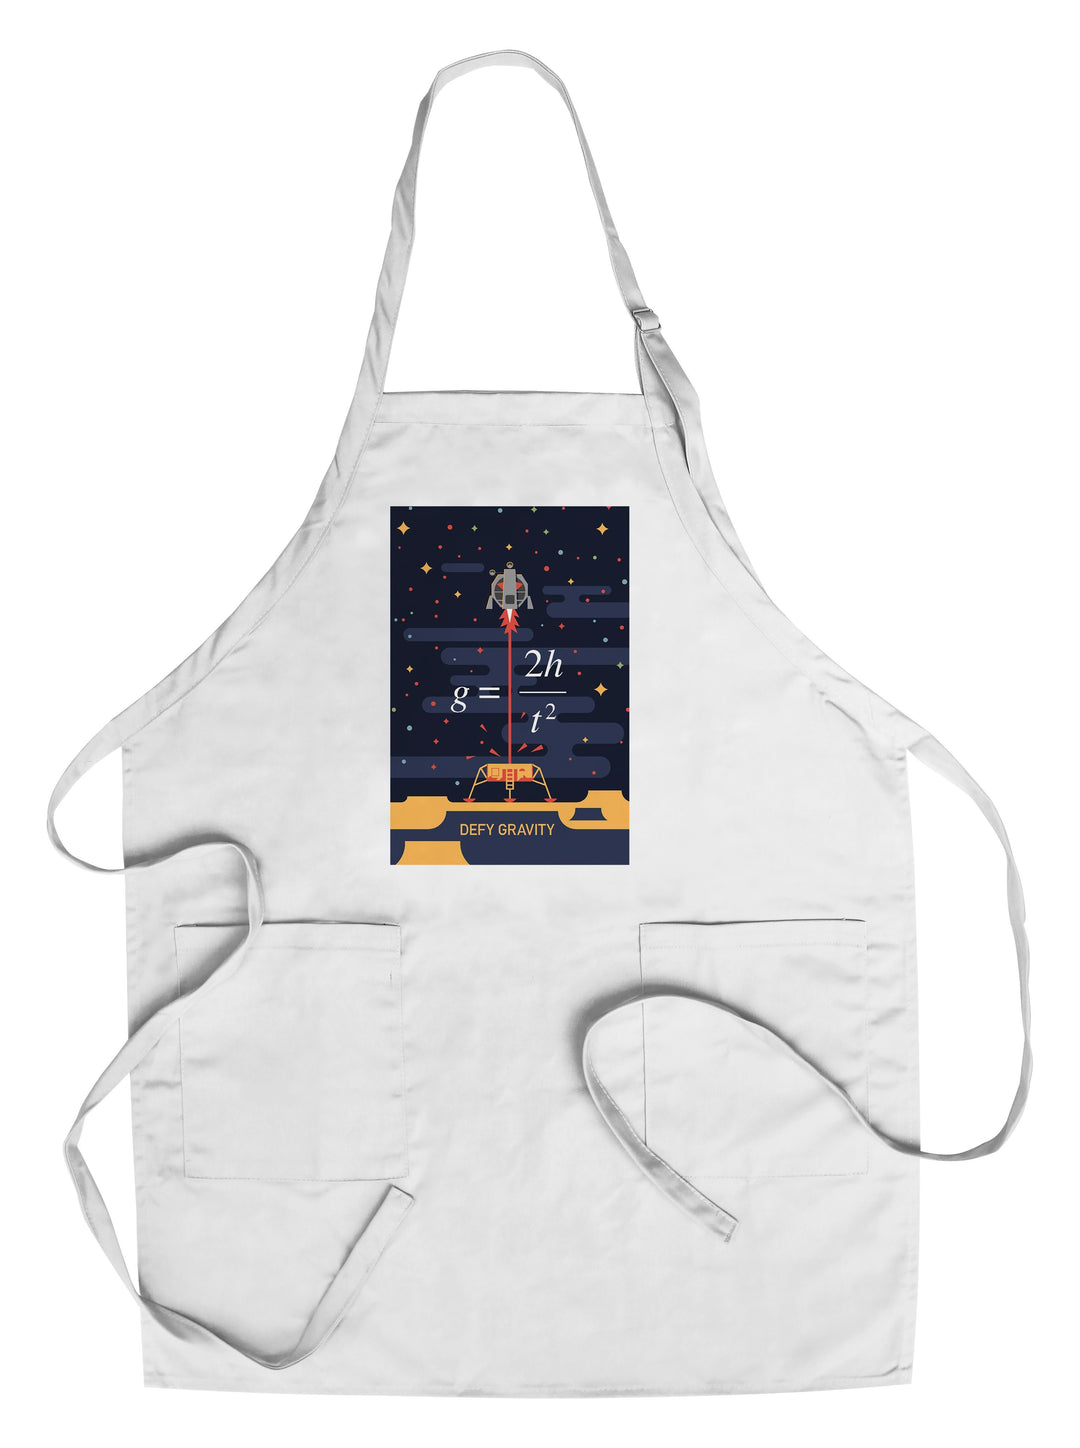 Equations and Emojis Collection, Lunar Lander, Defy Gravity, Towels and Aprons Kitchen Lantern Press Chef's Apron 